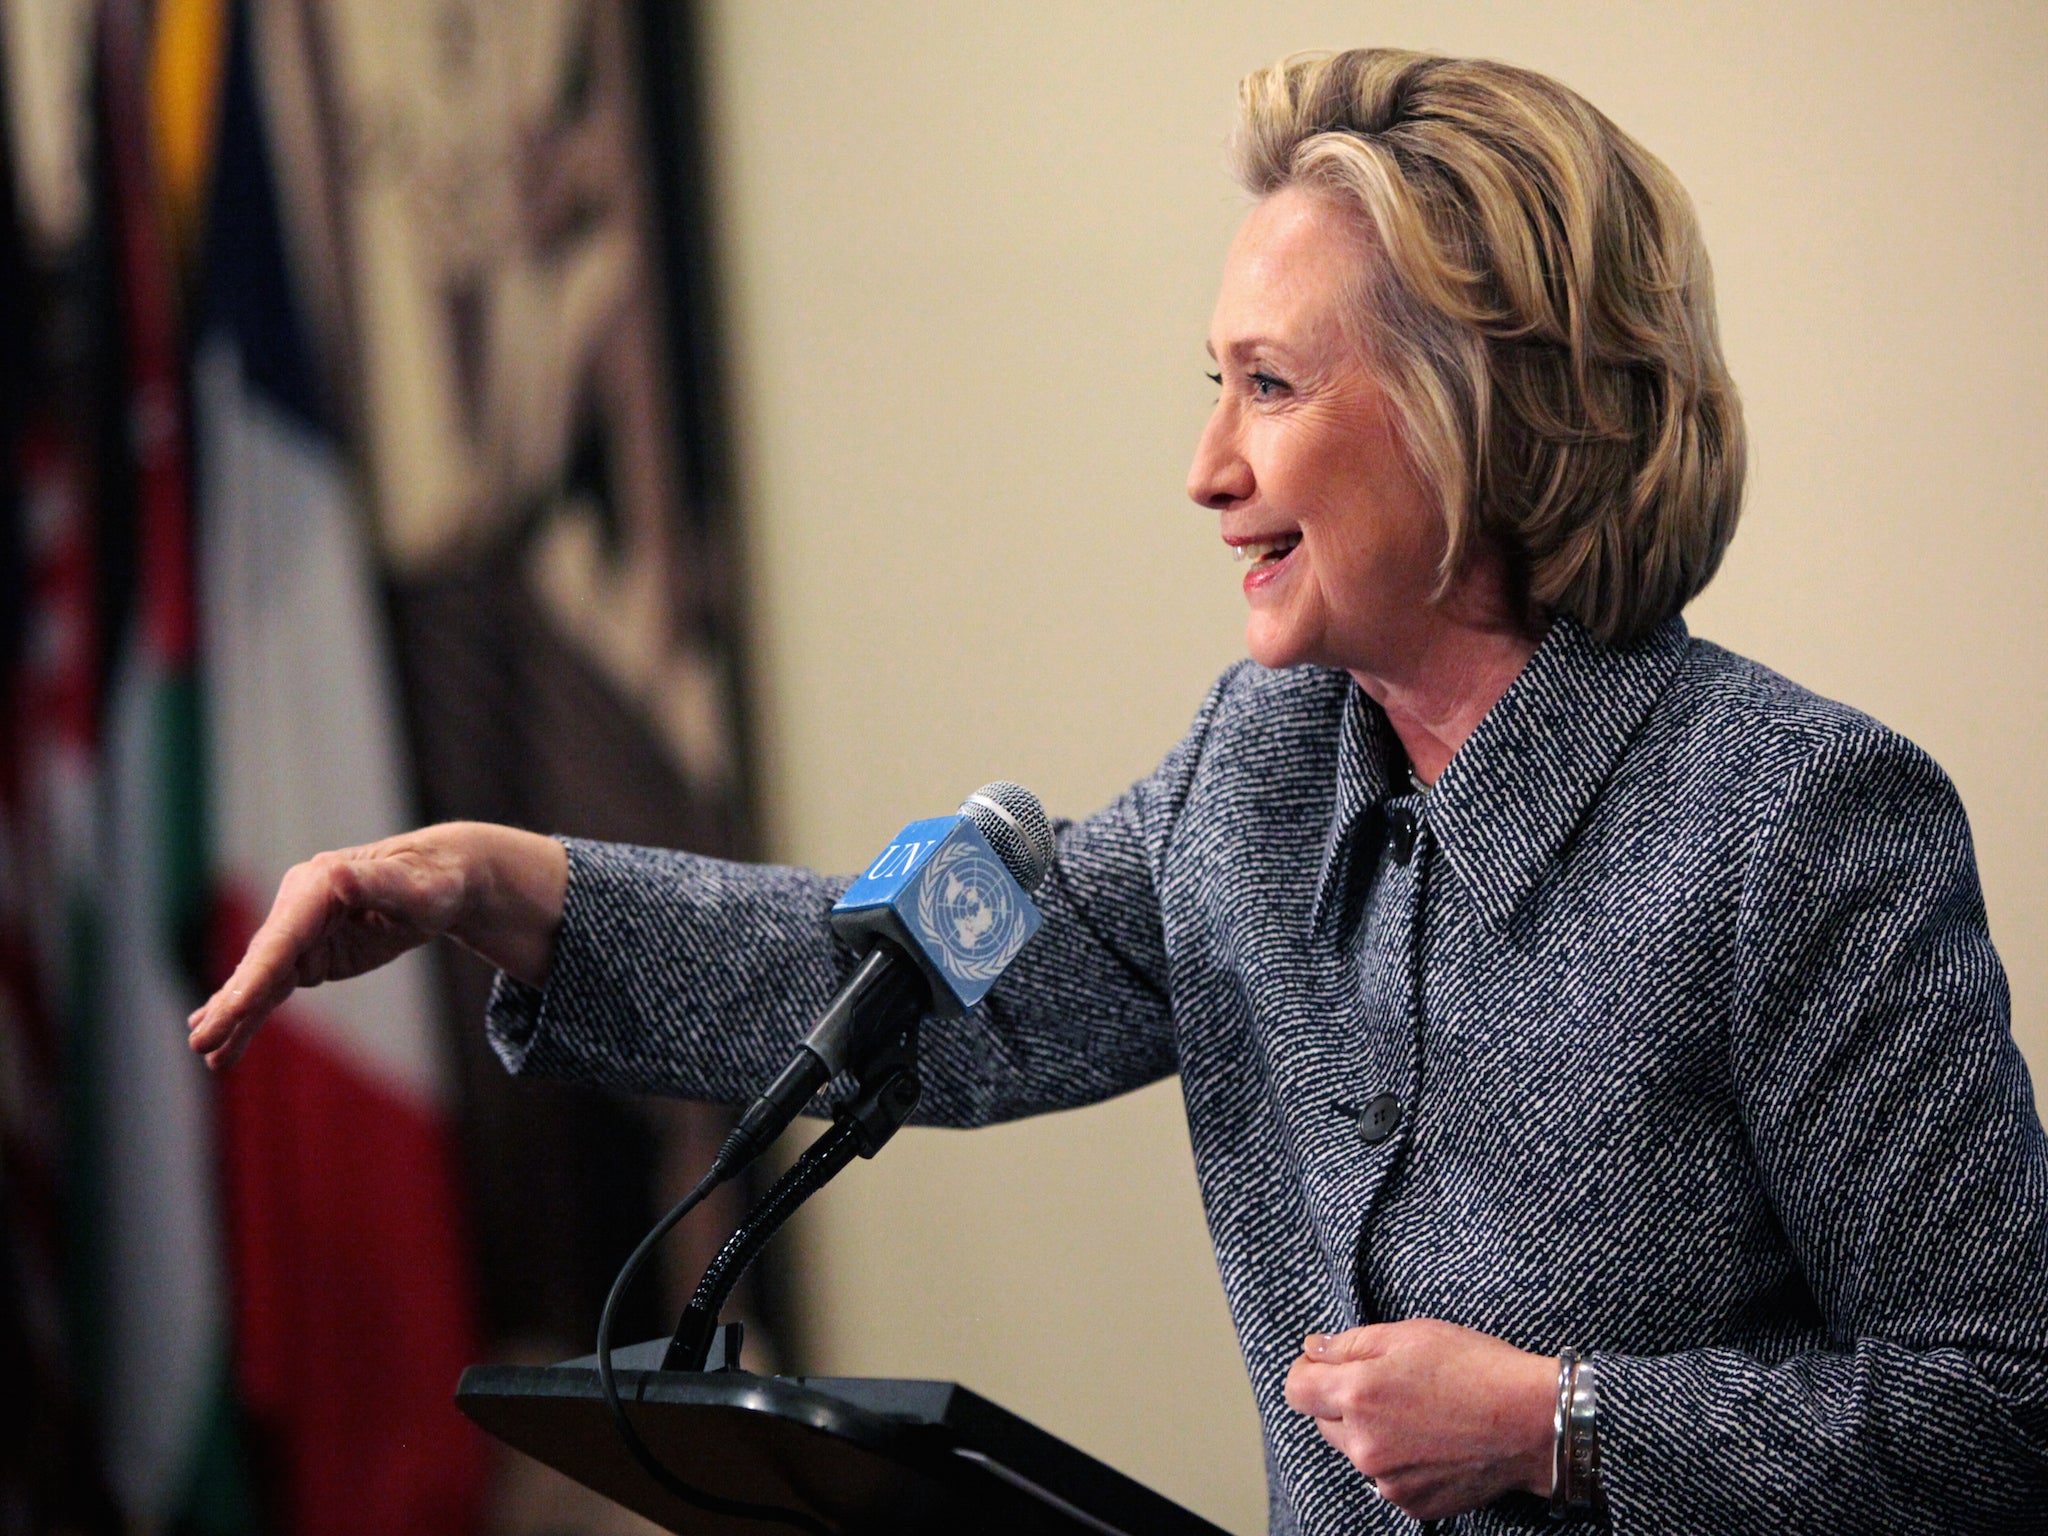 Hilary Clinton at press conference last week